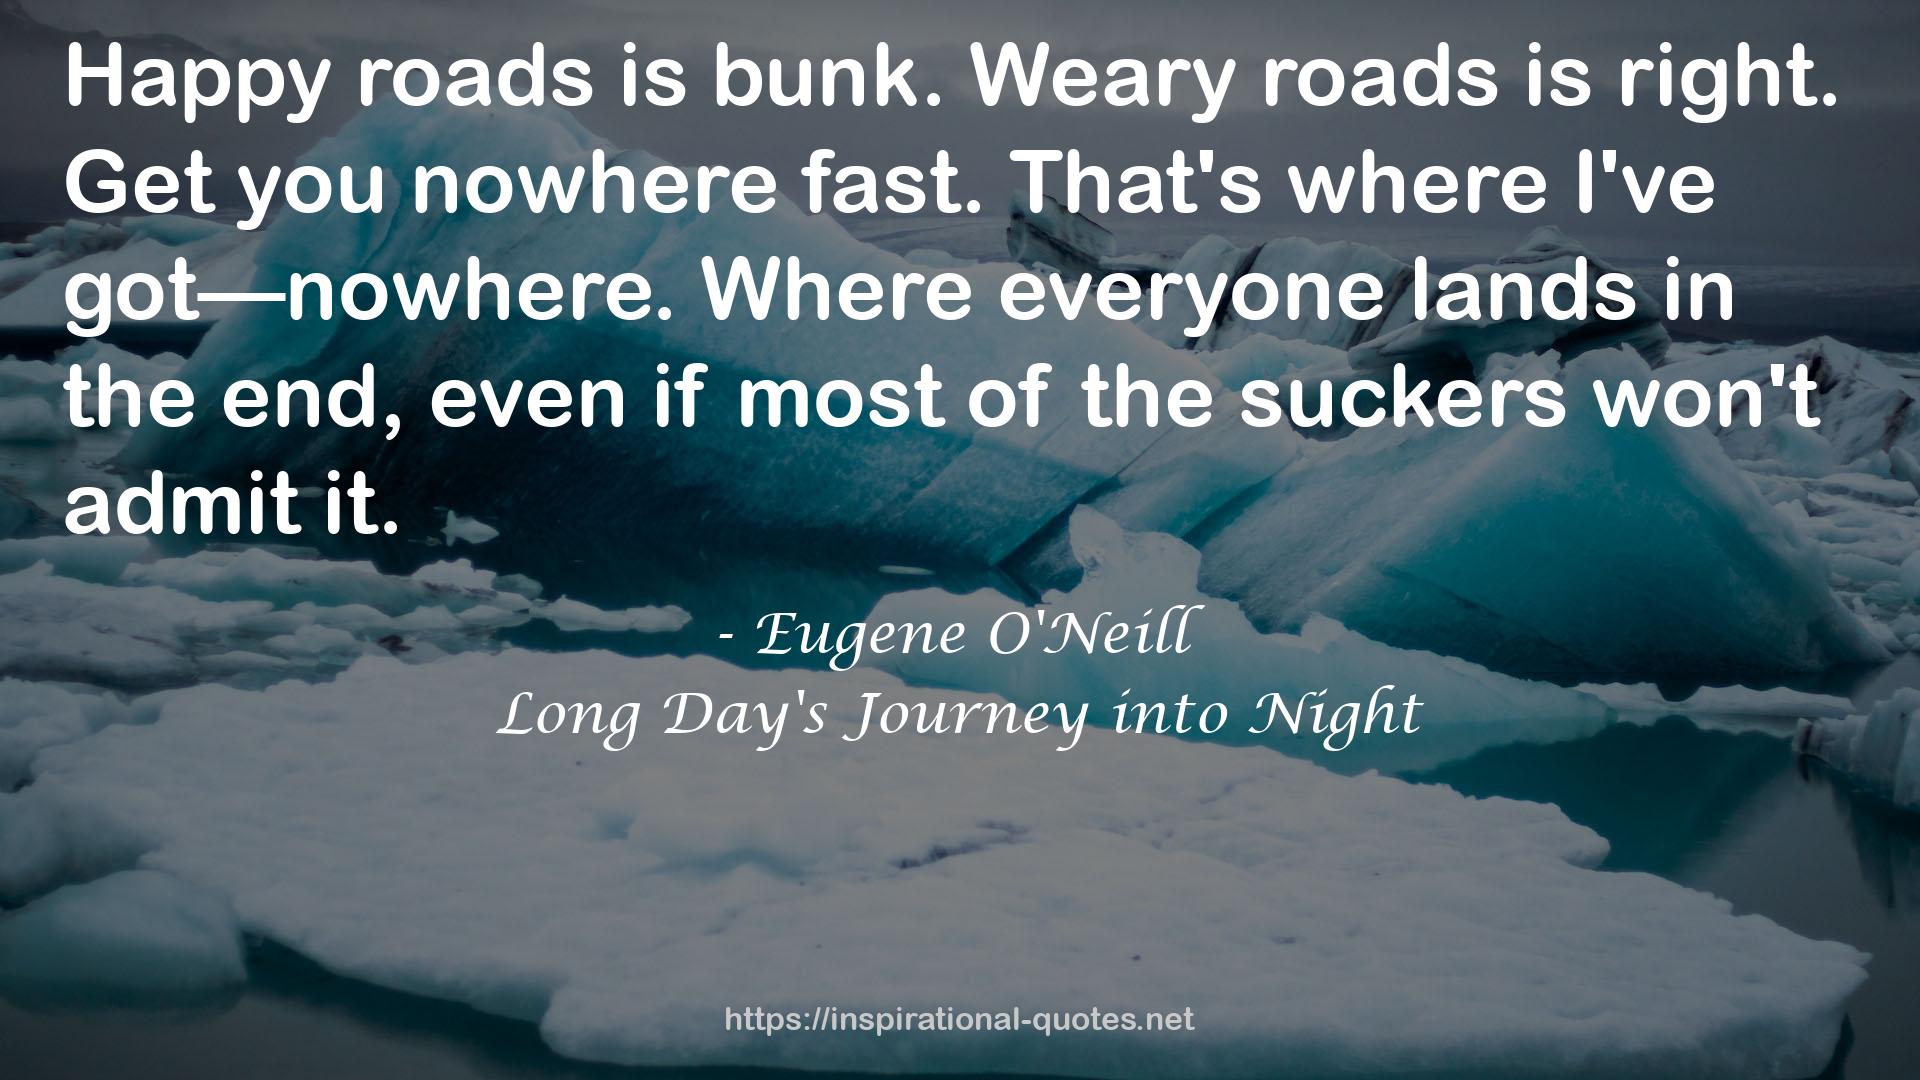 Long Day's Journey into Night QUOTES